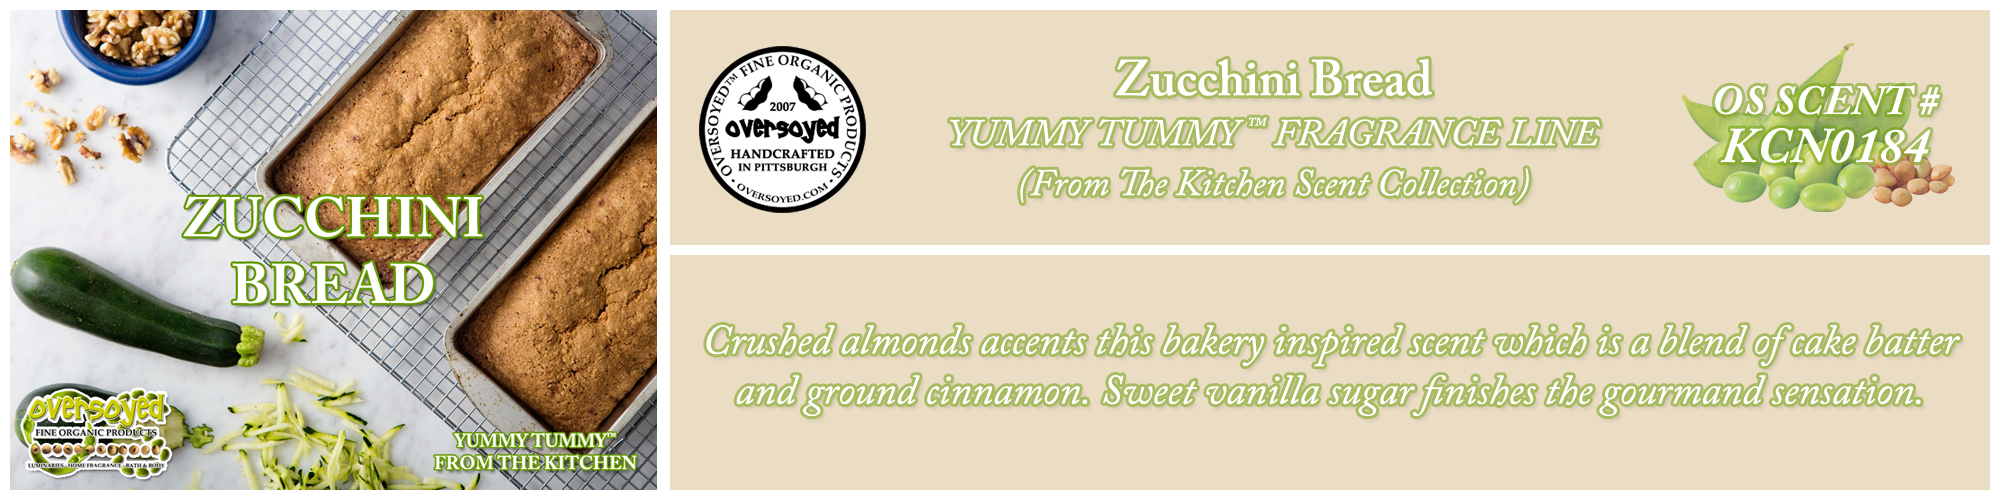 Zucchini Bread Handcrafted Products Collection